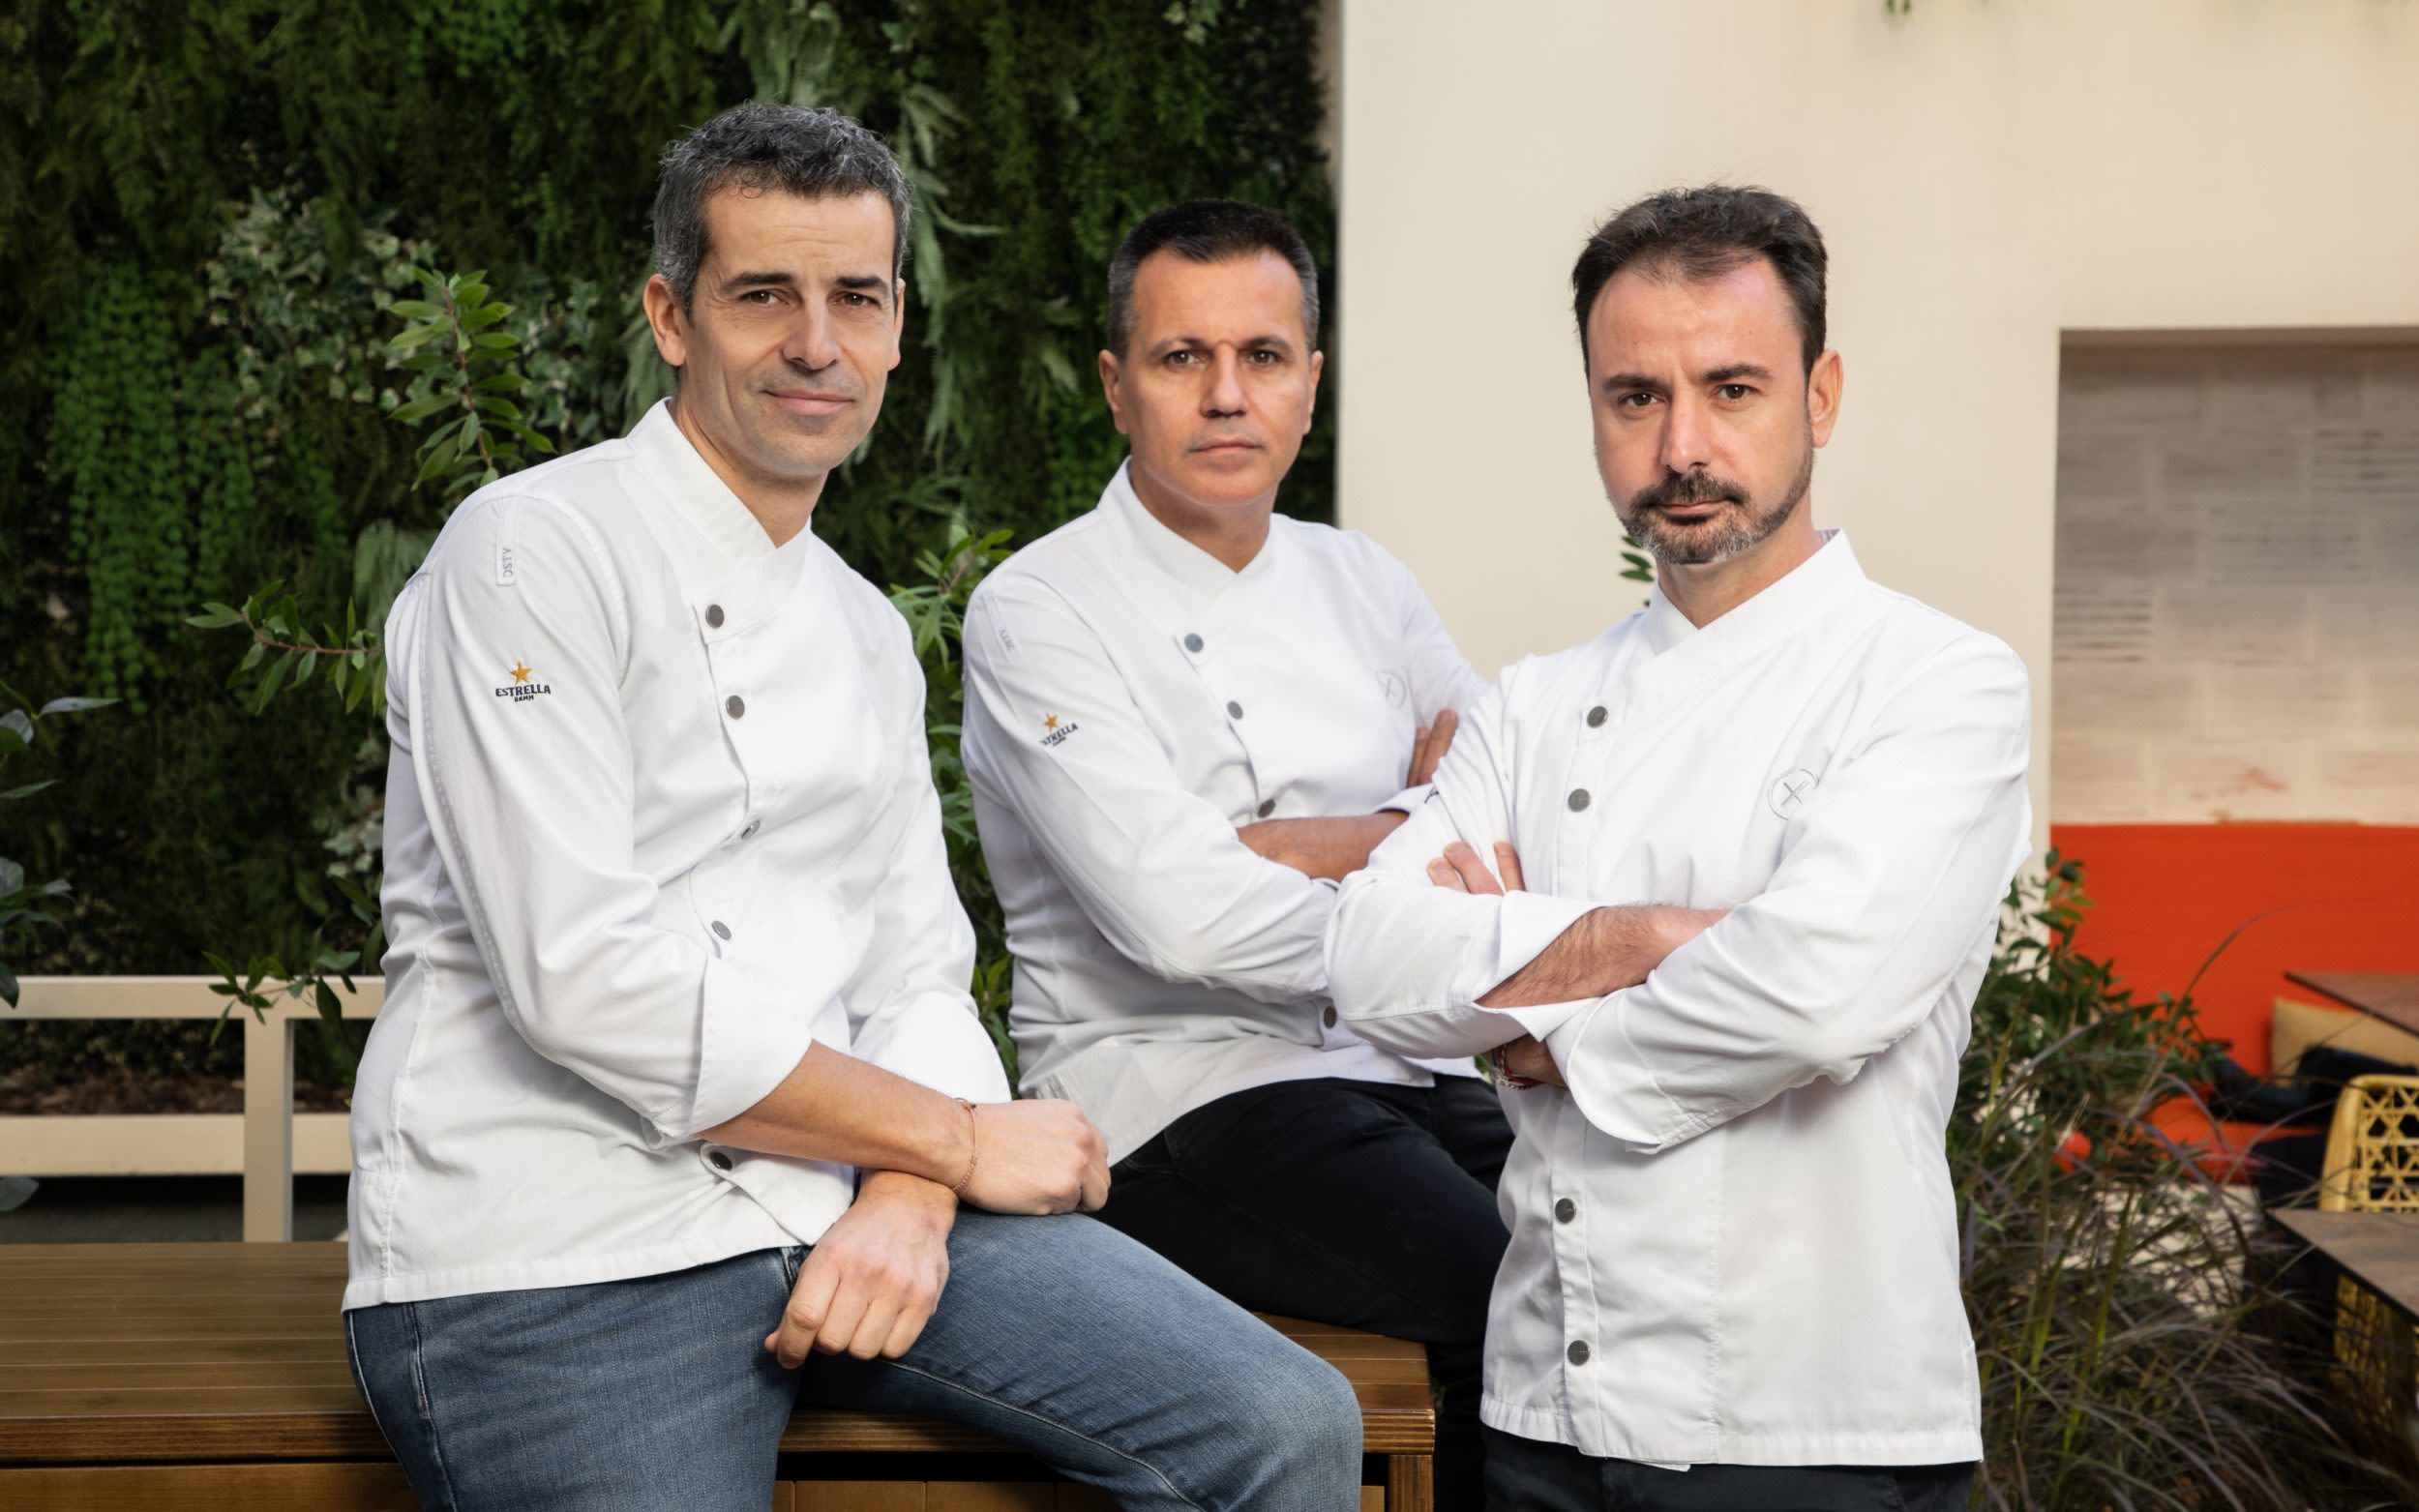 The World’s 50 Best Restaurants awards – a victory for Spain